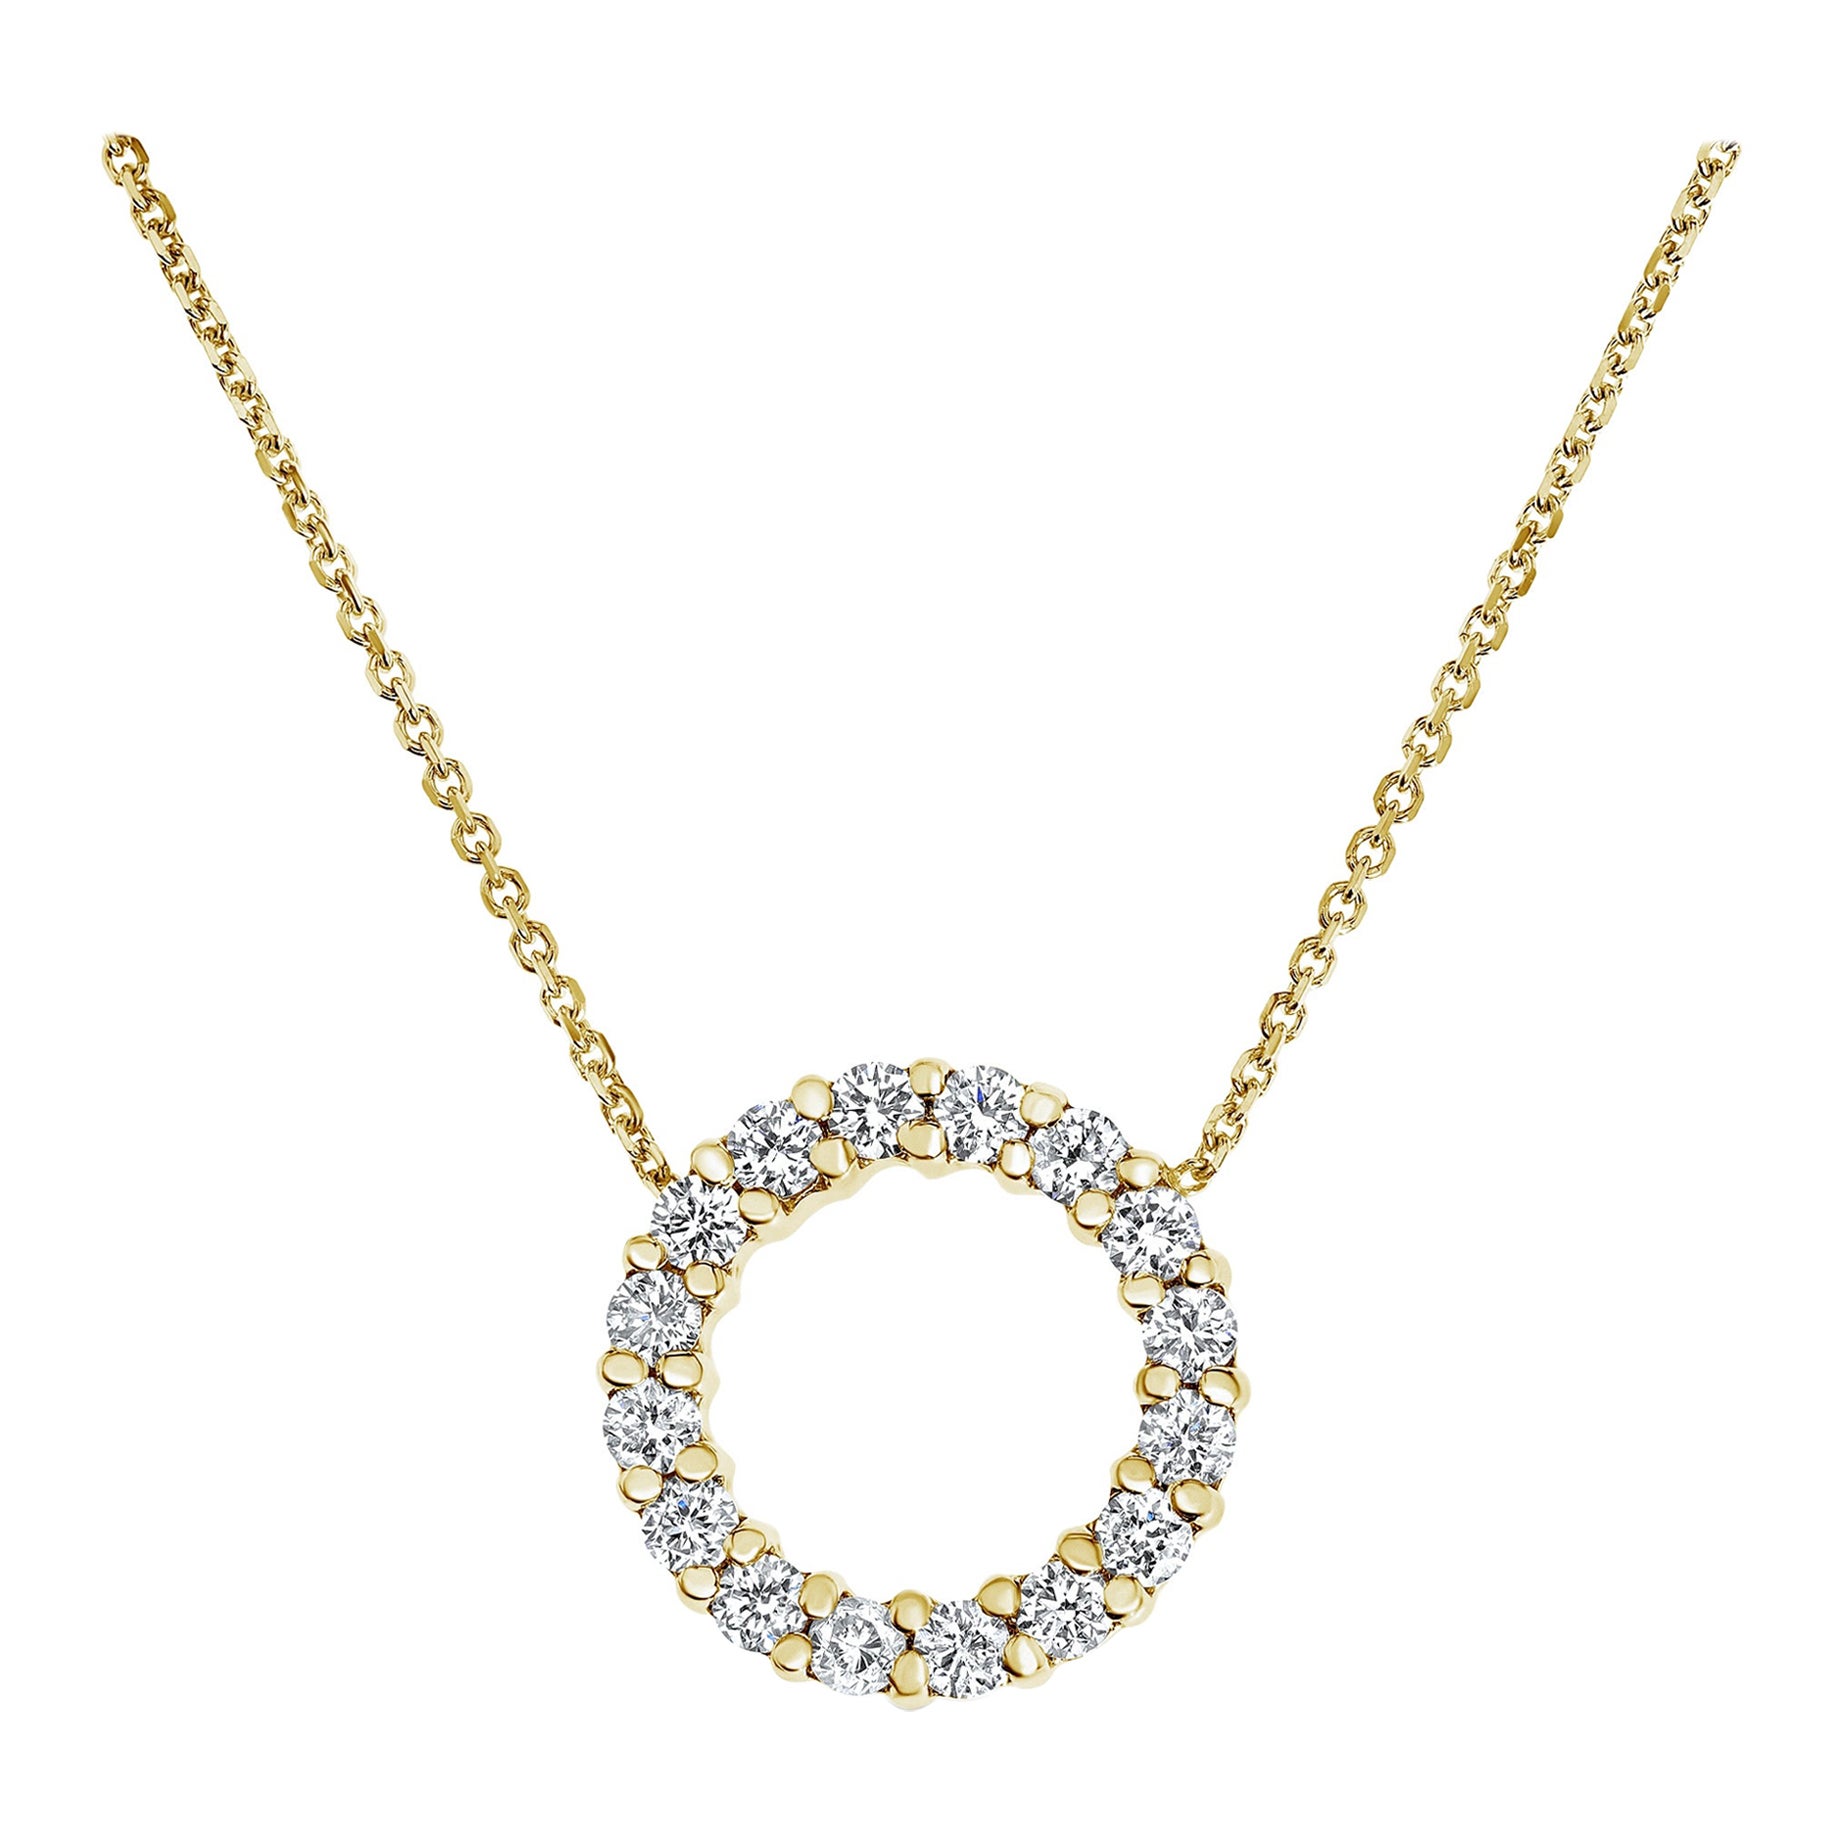 0.40 Carat Diamond Open Circle Karma Necklace in 14K Yellow Gold, Shlomit Rogel For Sale